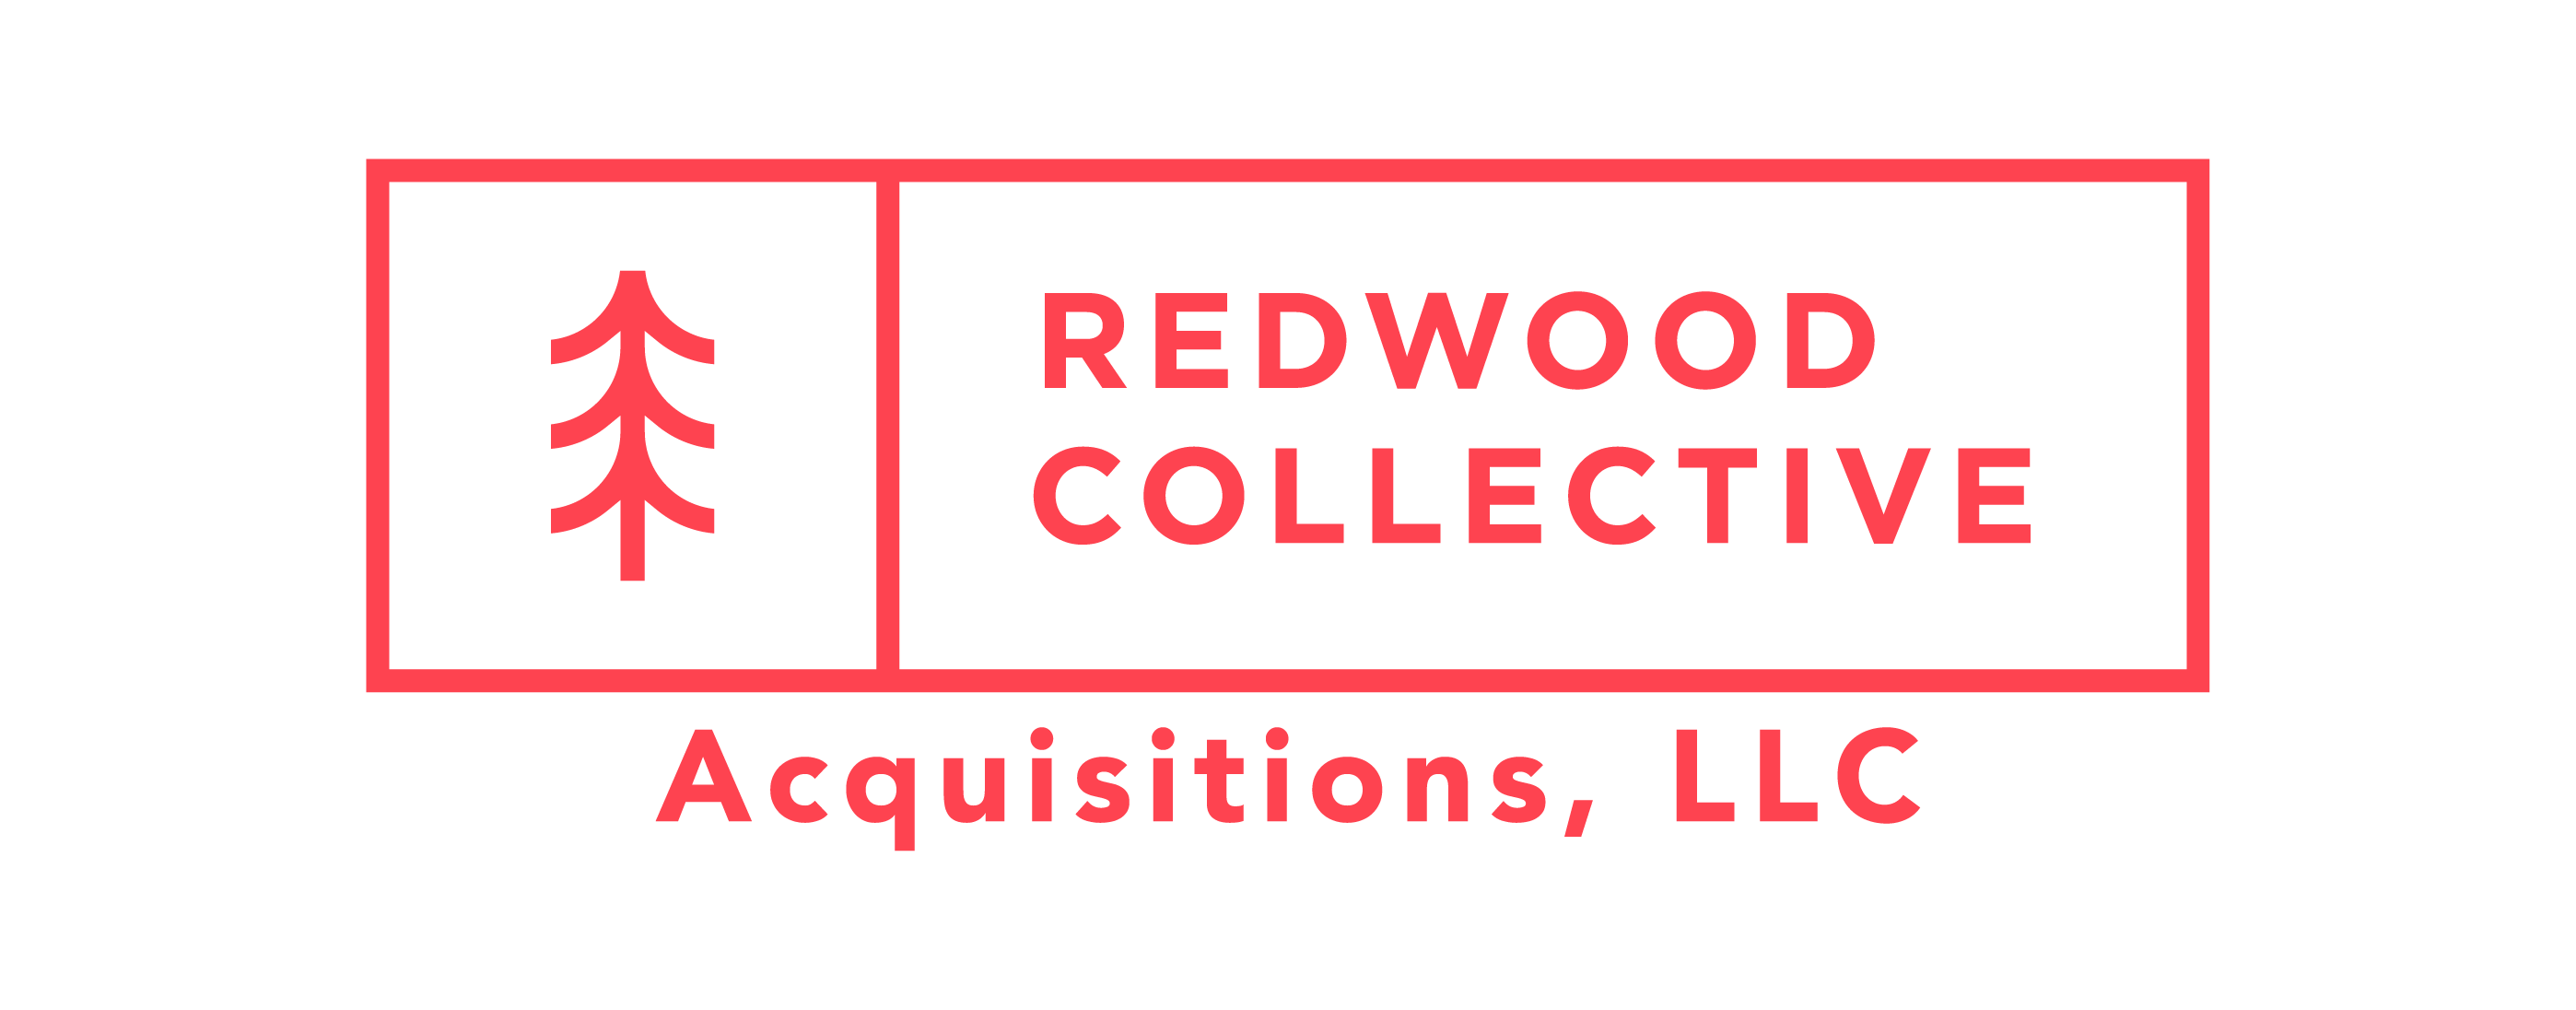 Redwood Collective Acquisitions